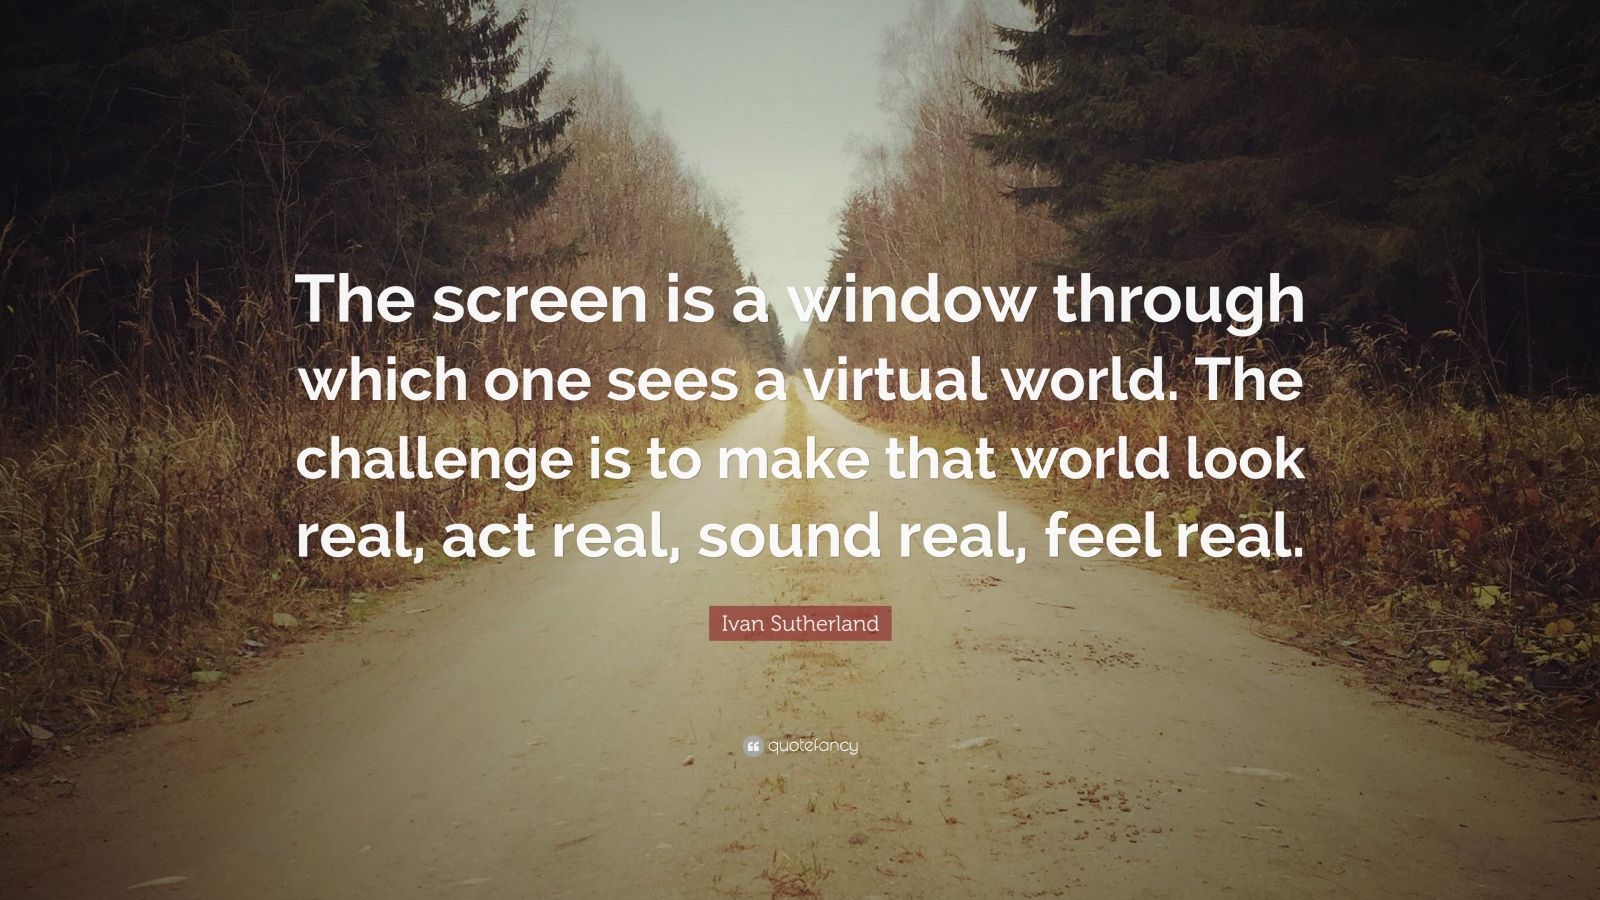 Ivan Sutherland Quote: “The screen is a window through which one sees a